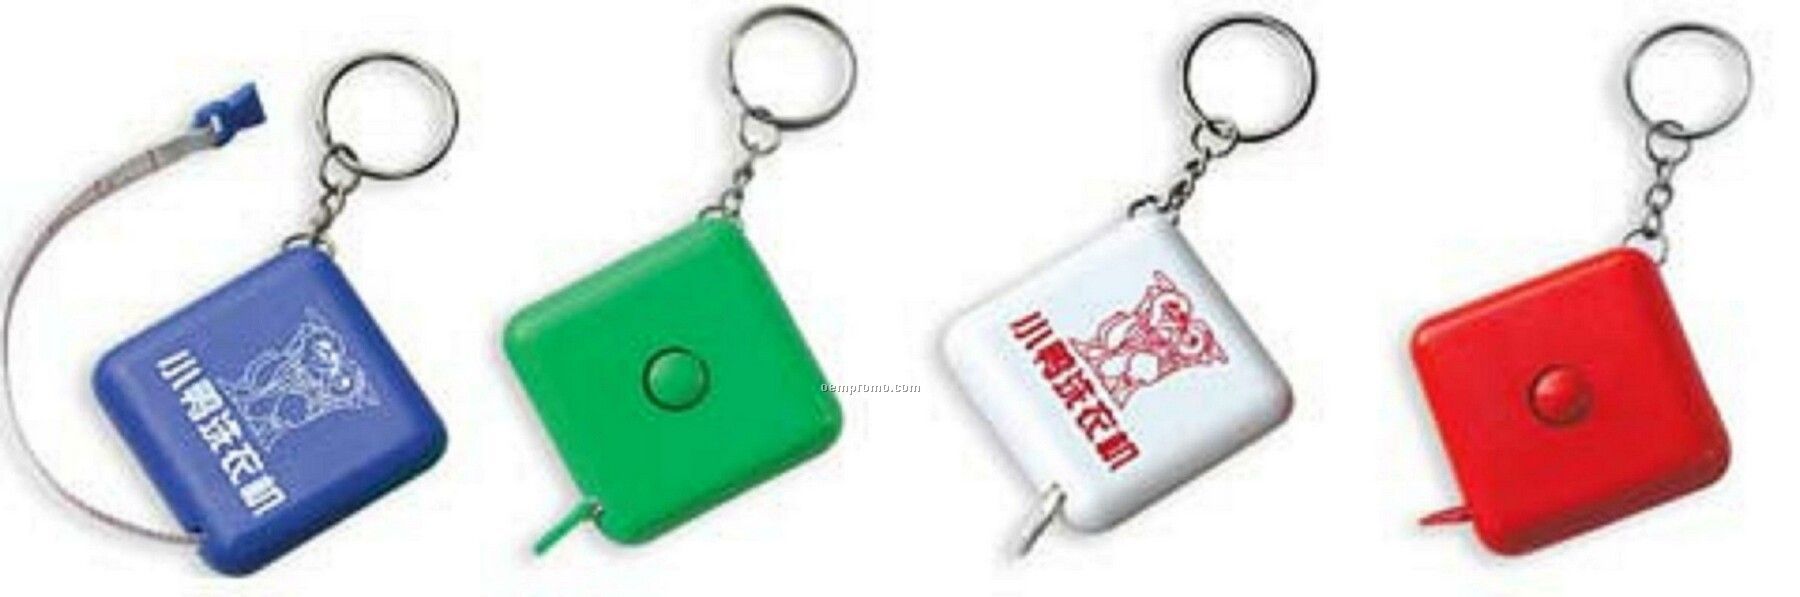 Square Shape Tape Measure With Key Holder